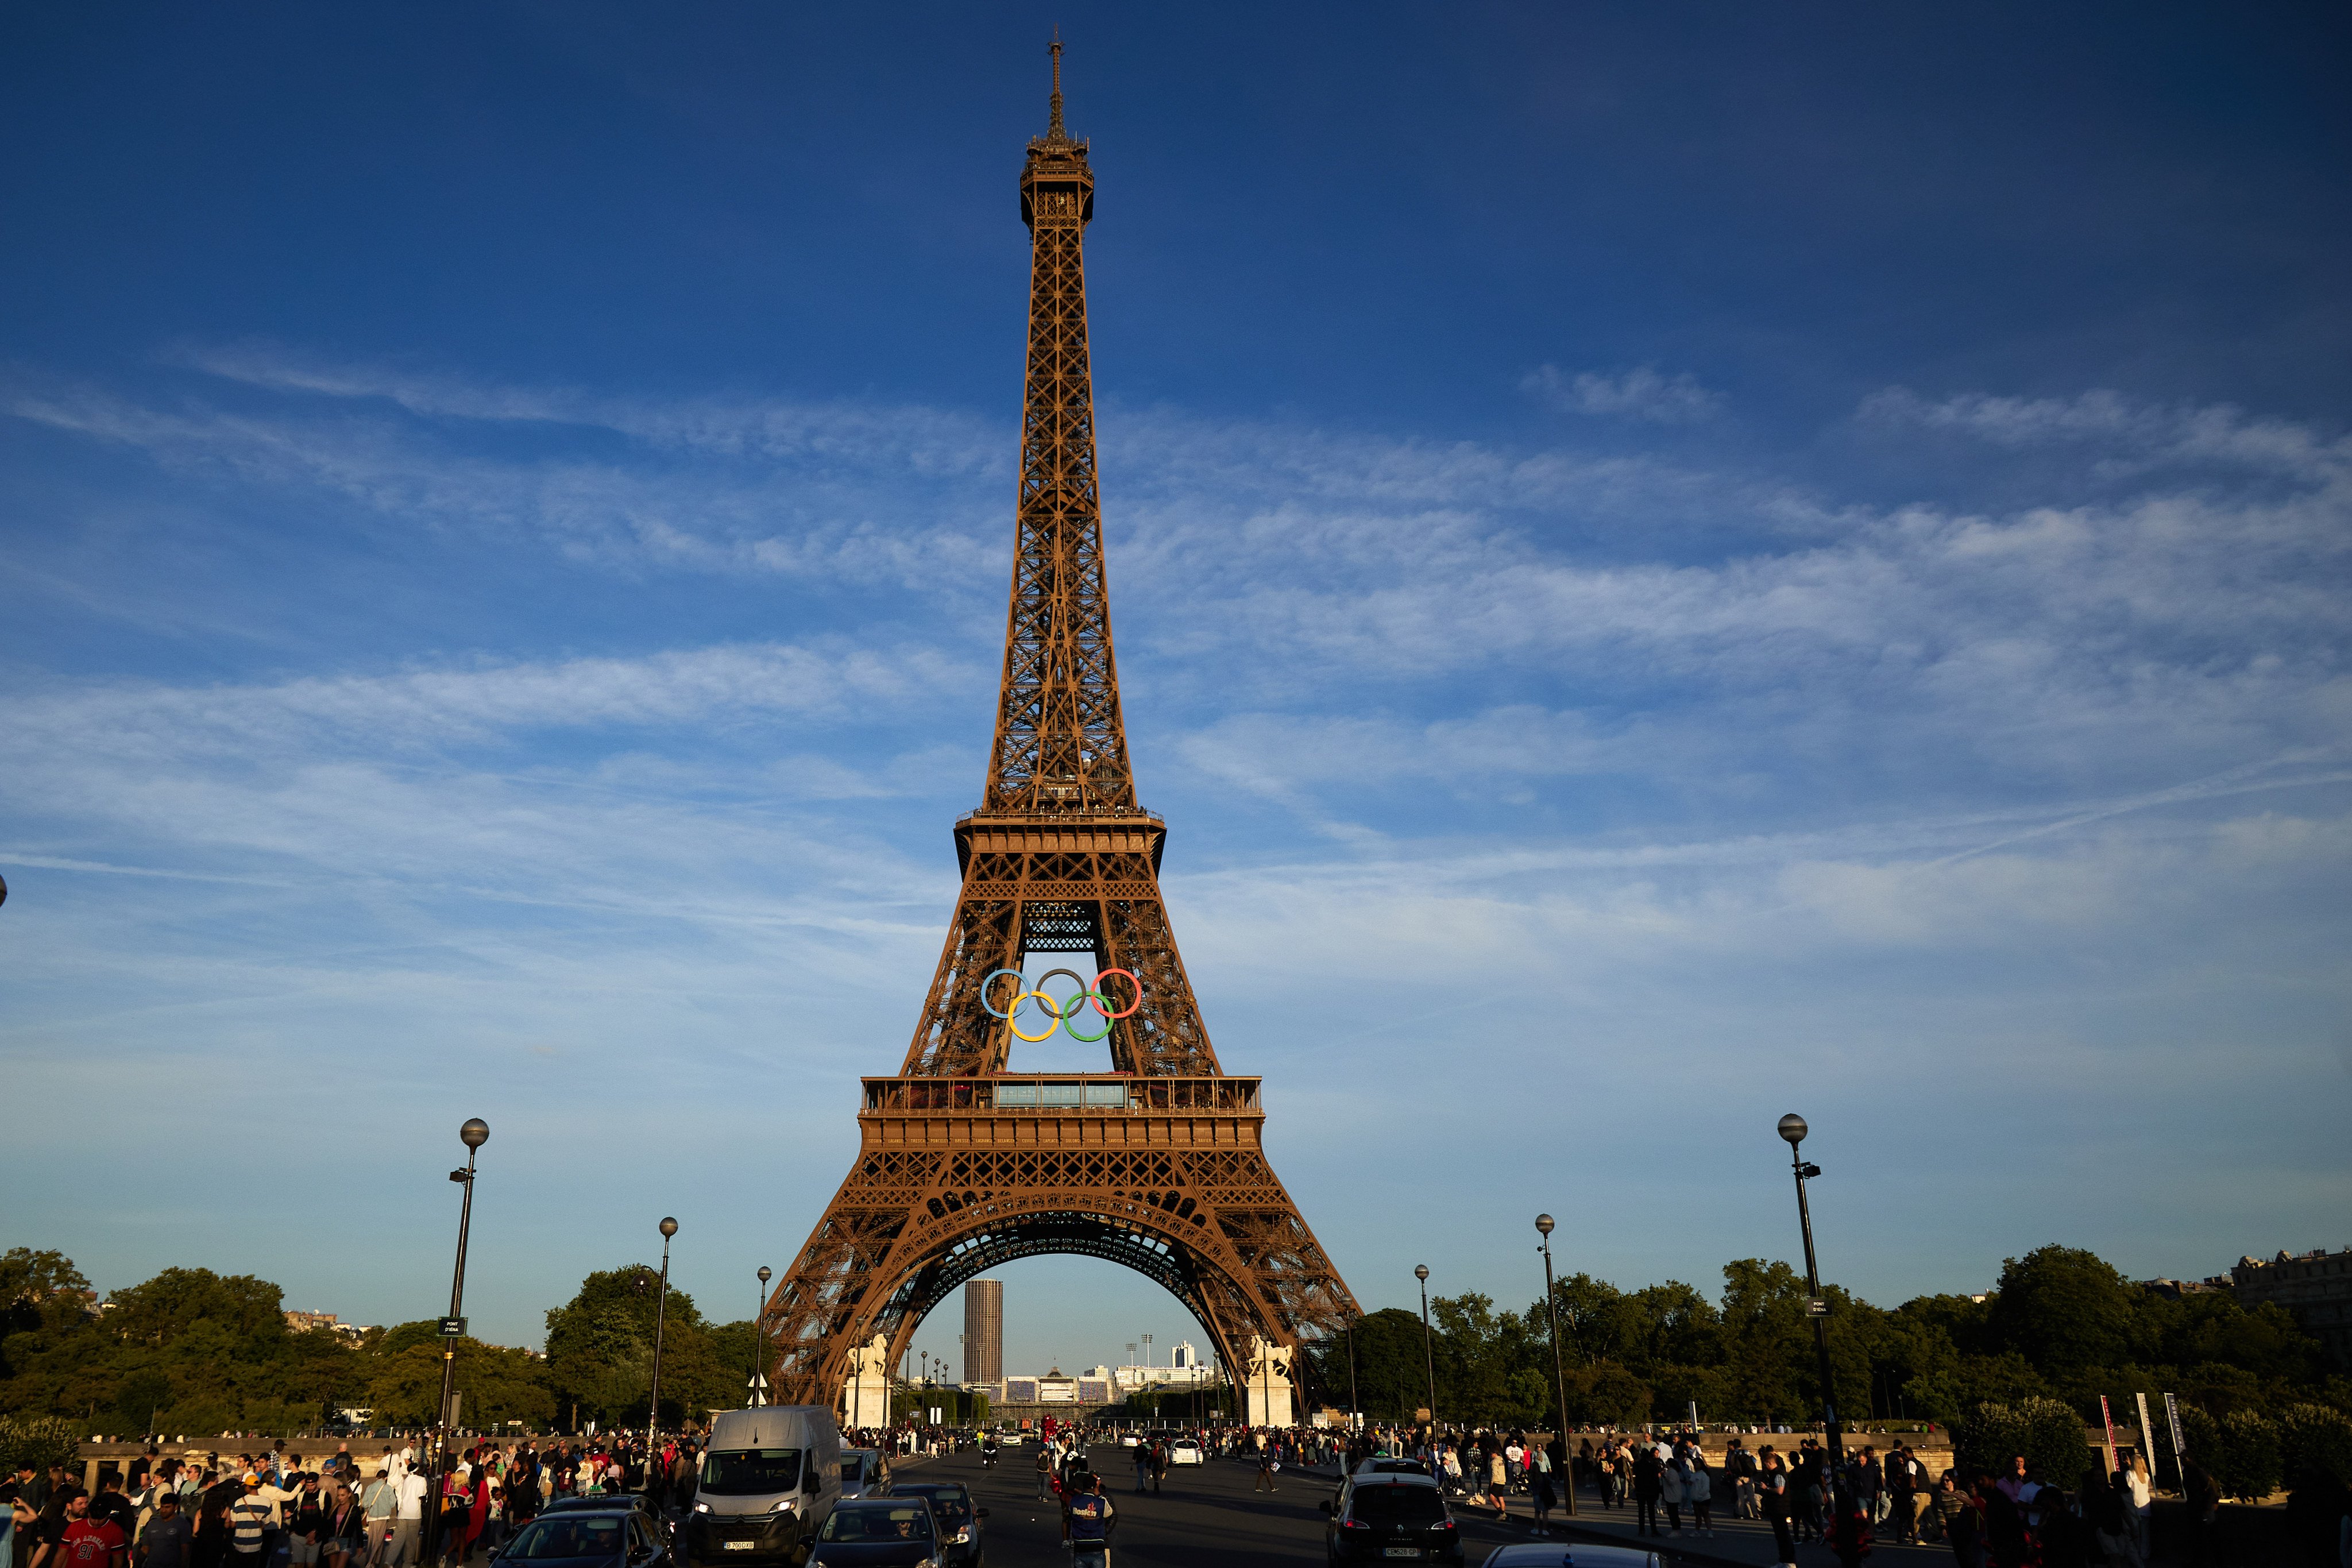 Heading to the Paris Olympics? Inject some French luxury with Style’s guide. A view of the Eiffel Tower adorned with The Olympic Rings at Place du Trocadero. The city is gearing up to host the Olympic Summer Games, from July 26 to August 11. Photo: Getty Images